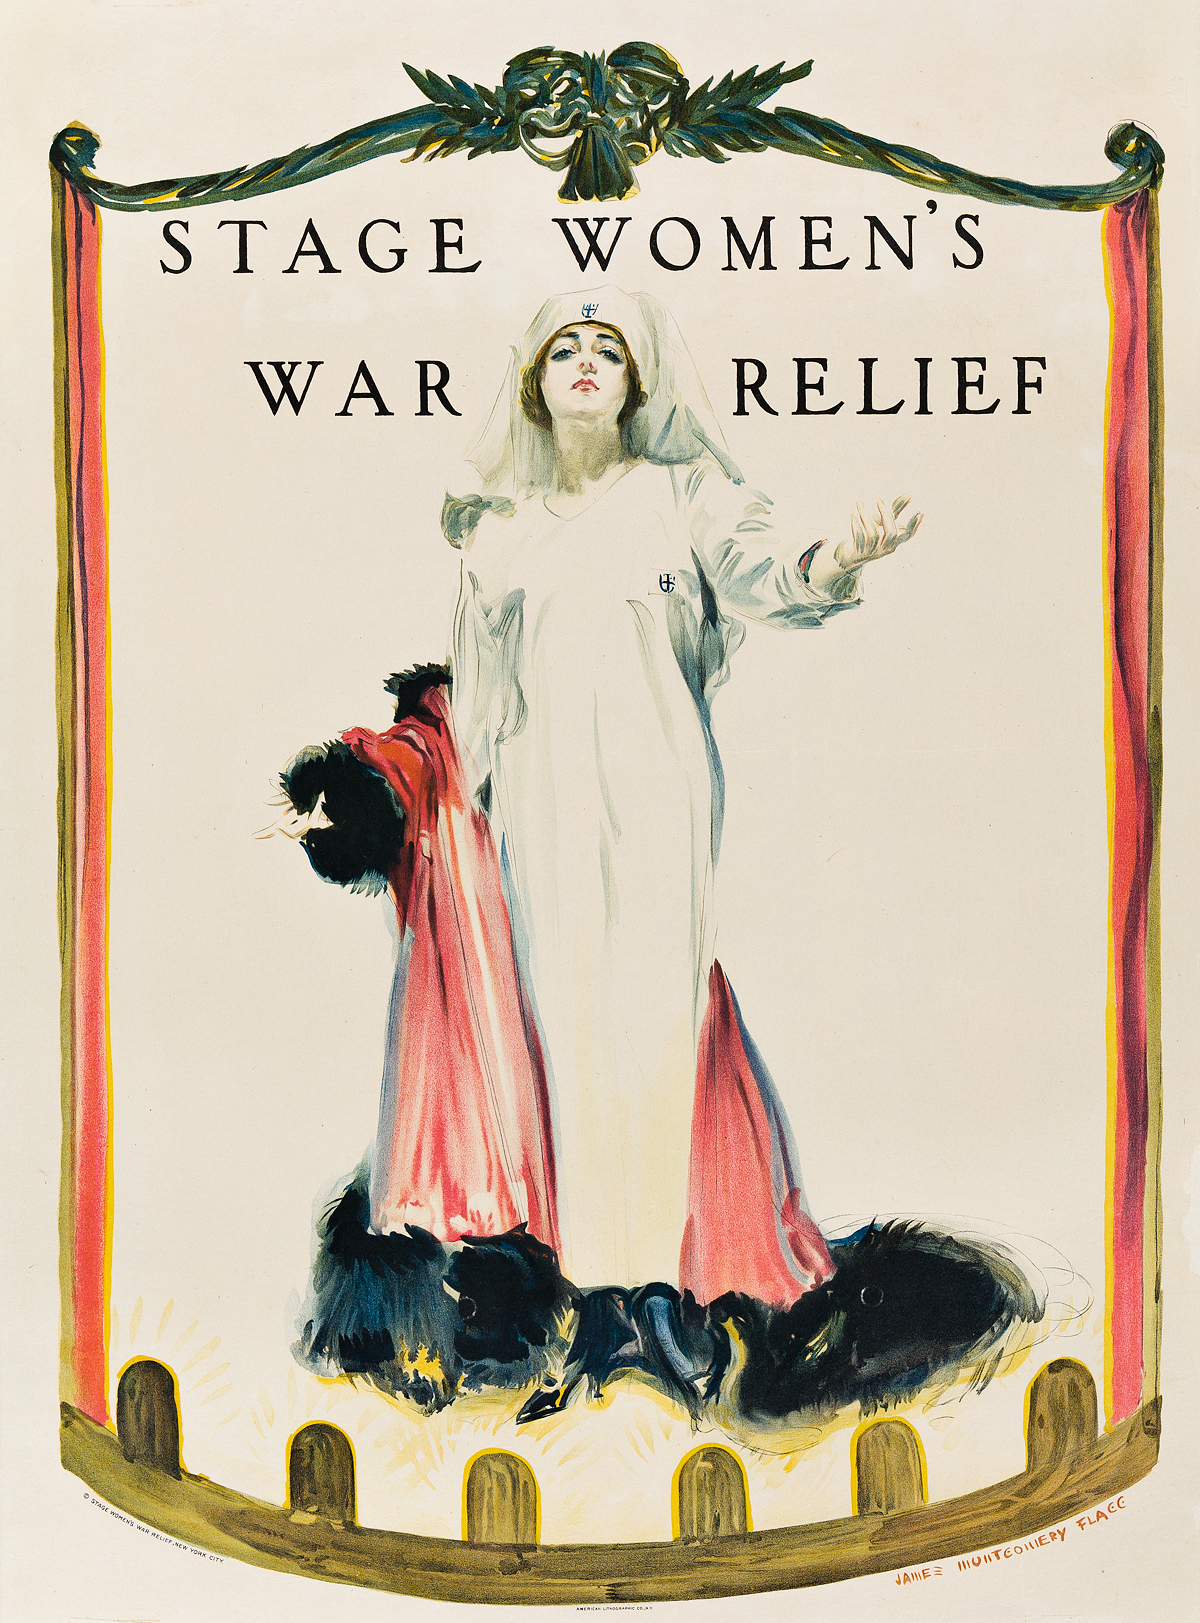 JAMES MONTGOMERY FLAGG (1870-1960). STAGE WOMENS WAR RELIEF. 1918. 29x21 inches, 74x55 cm. American Lithographic Co., New York.